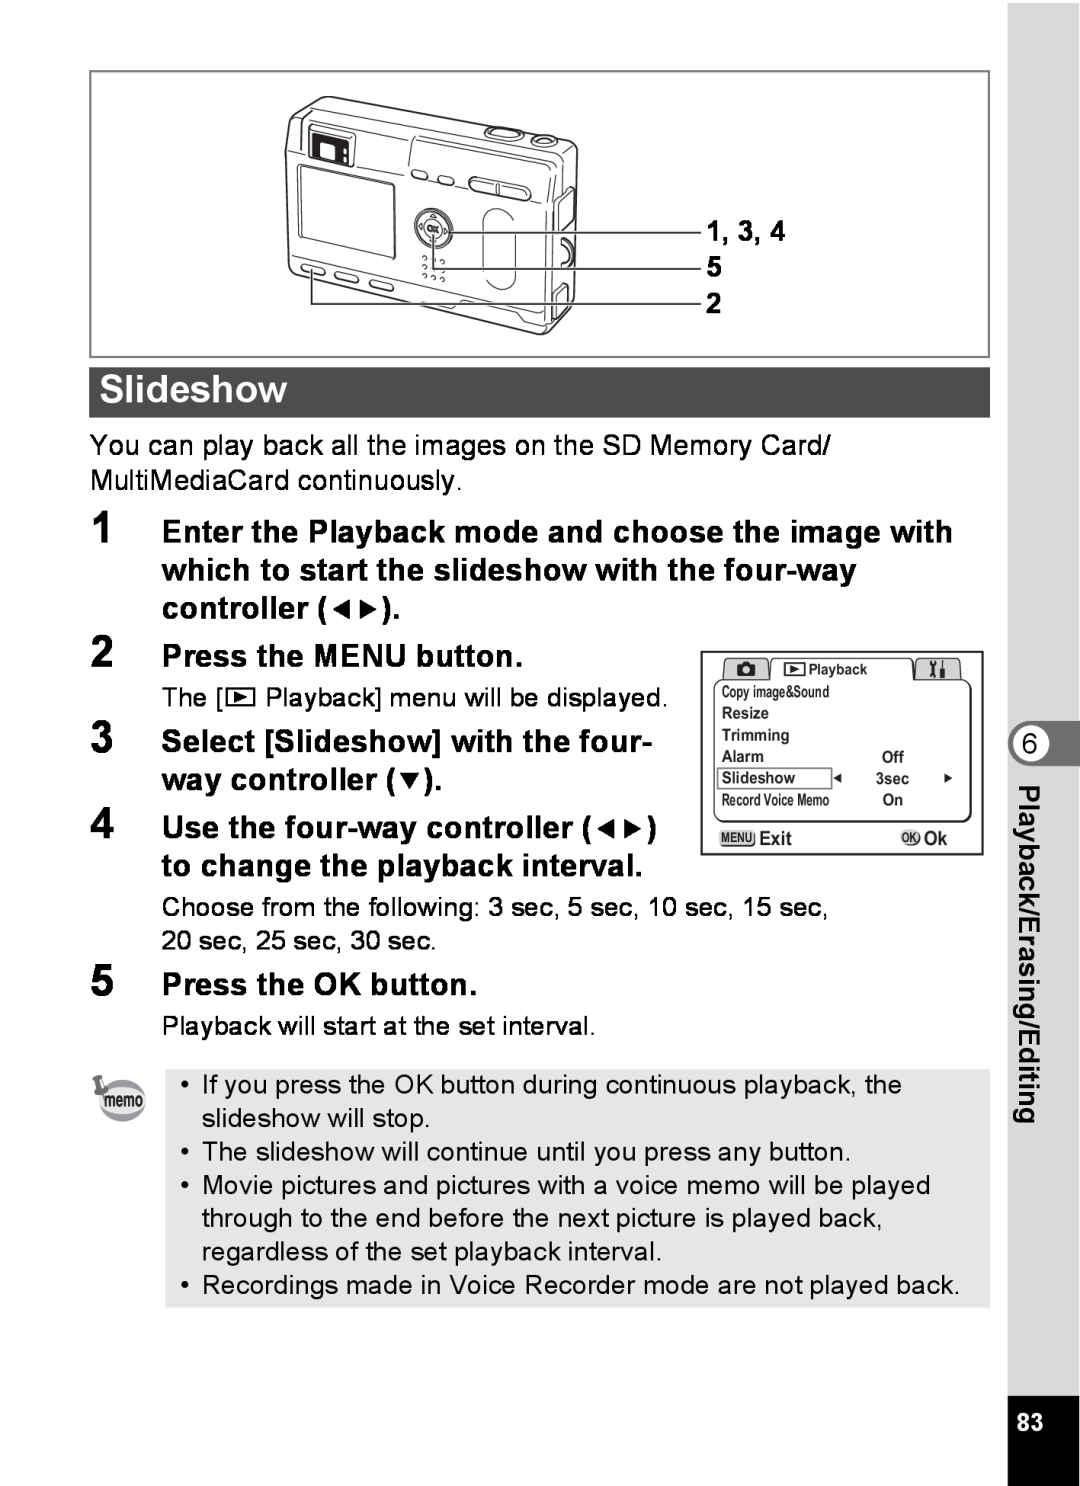 Pentax S4 manual Select Slideshow with the four, to change the playback interval, 1, 3, 4 5, Press the MENU button 